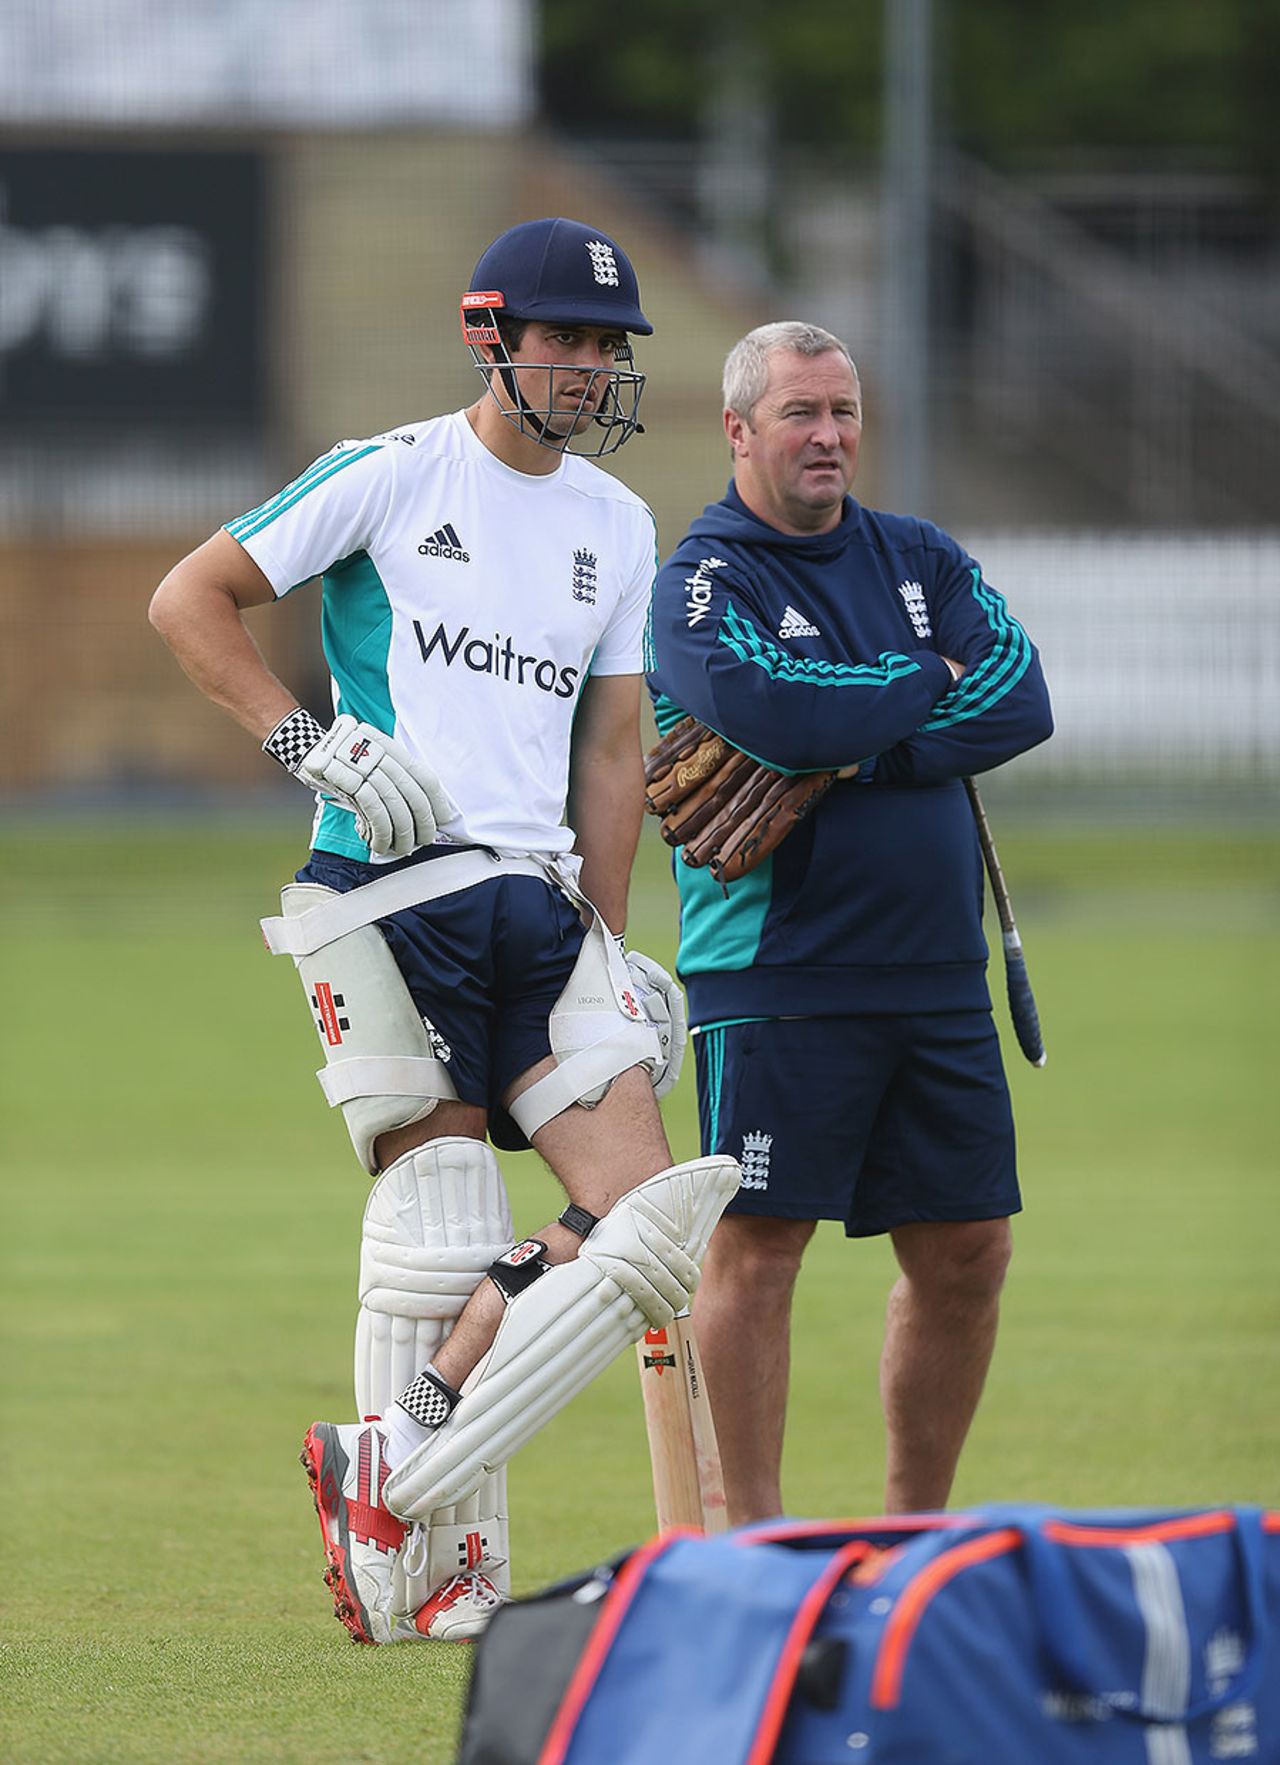 Alastair Cook and Paul Farbrace in the nets at Lord's, England v Pakistan, 1st Investec Test, Lord's, July 13, 2016